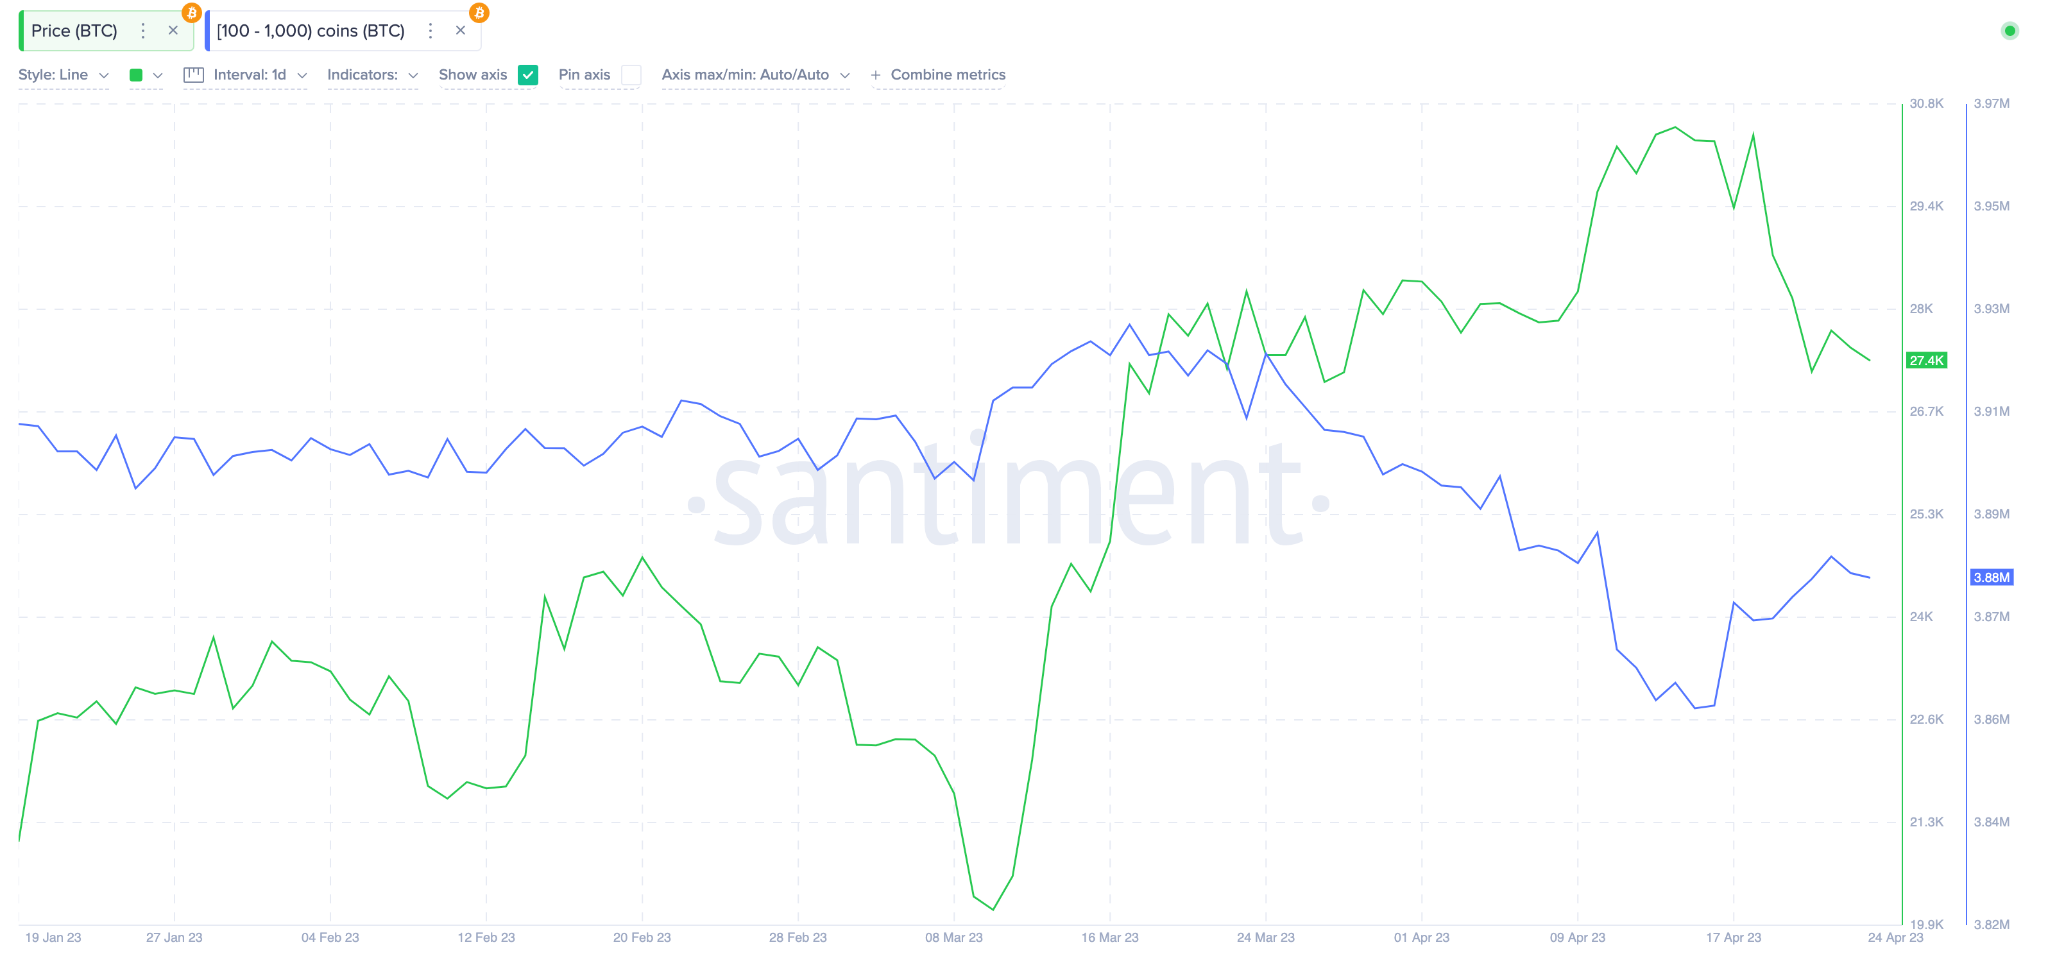 Bitcoin (BTC) Price vs. Weighted Sentiment. April 2023. 